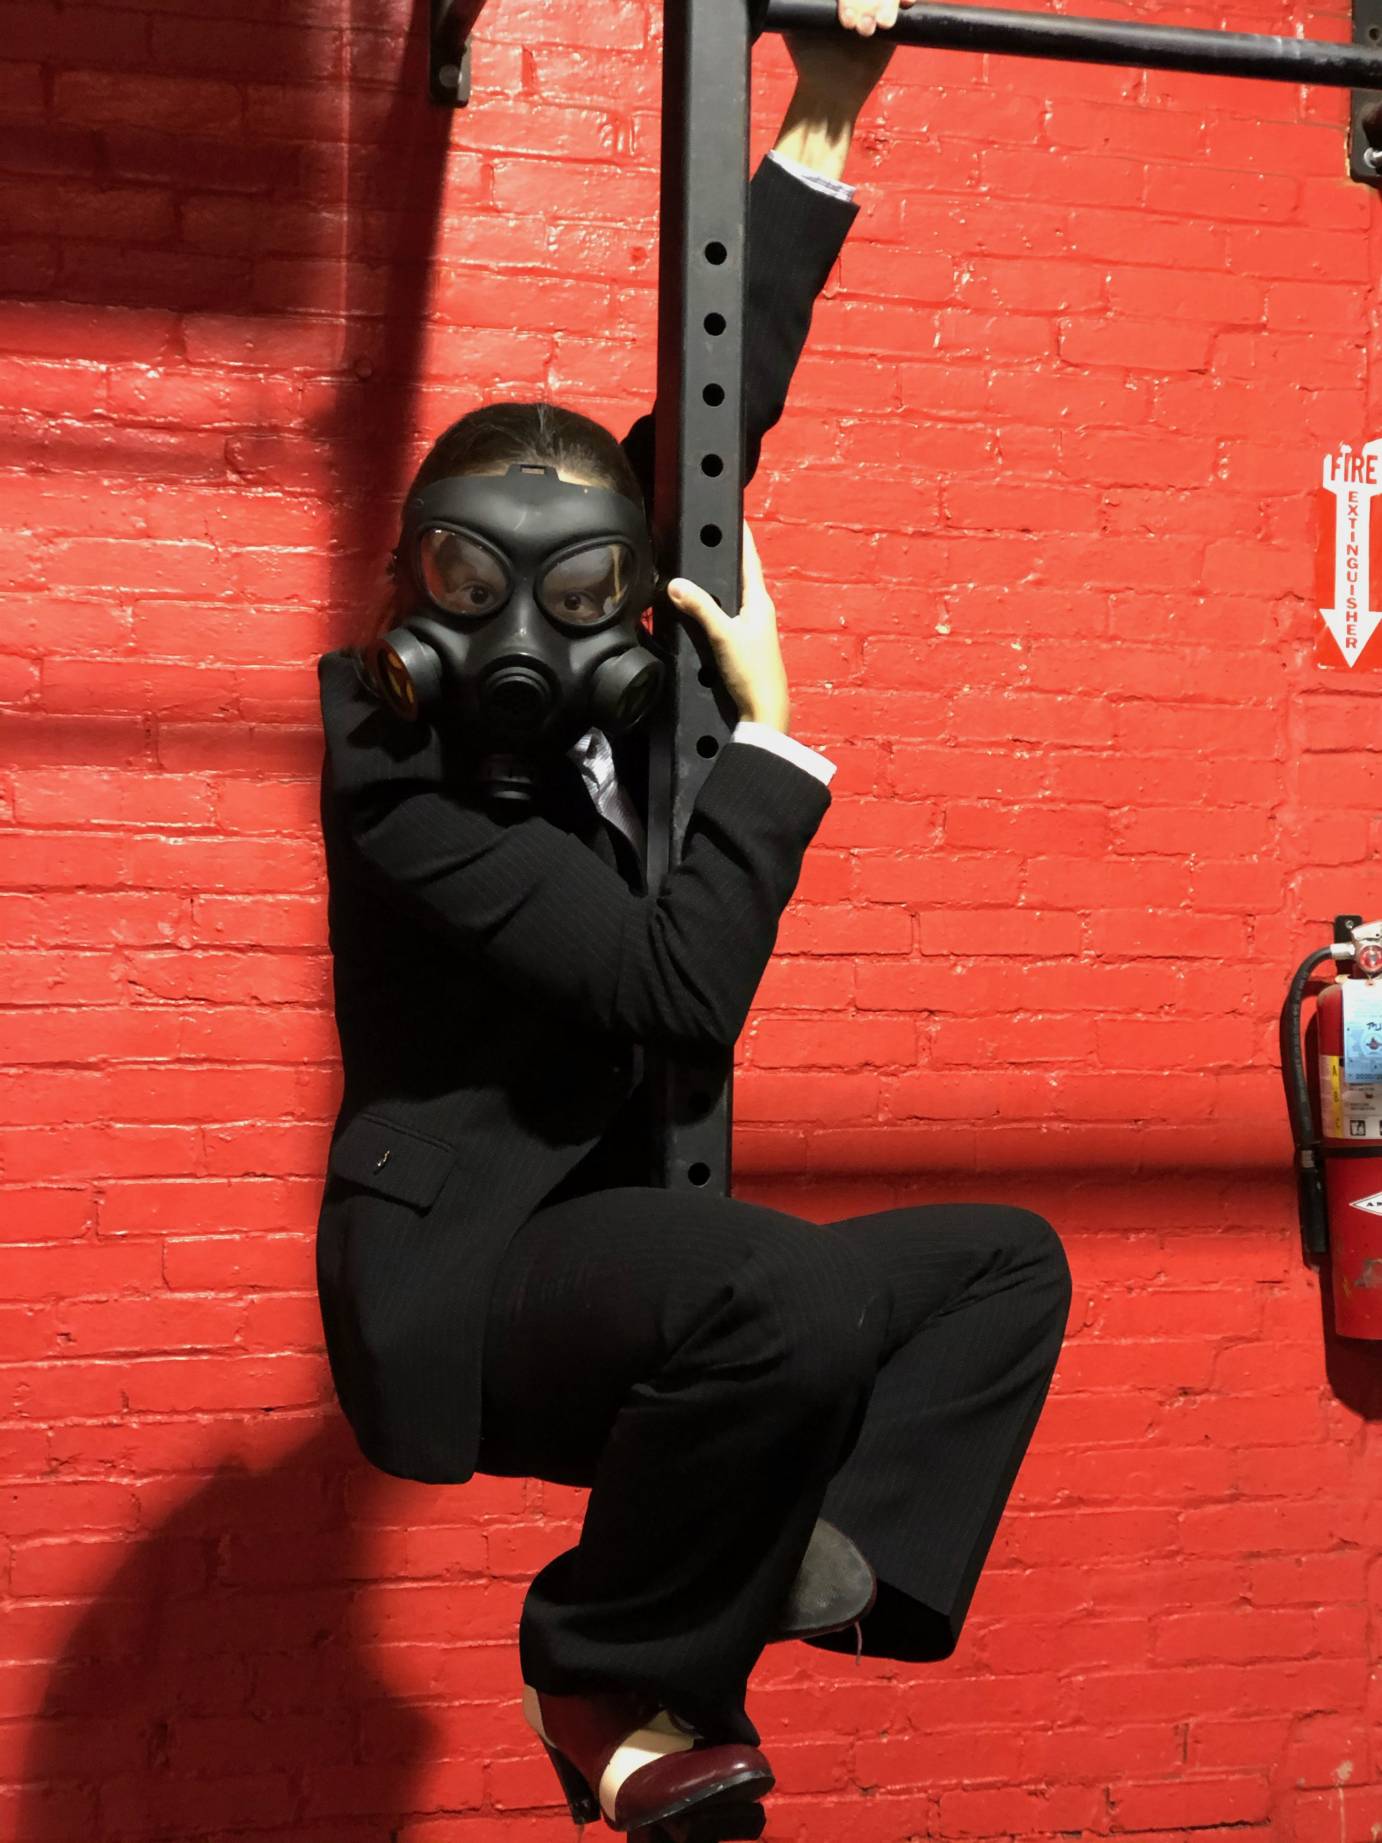 A man in a gas mask hangs on a pole against a red wall